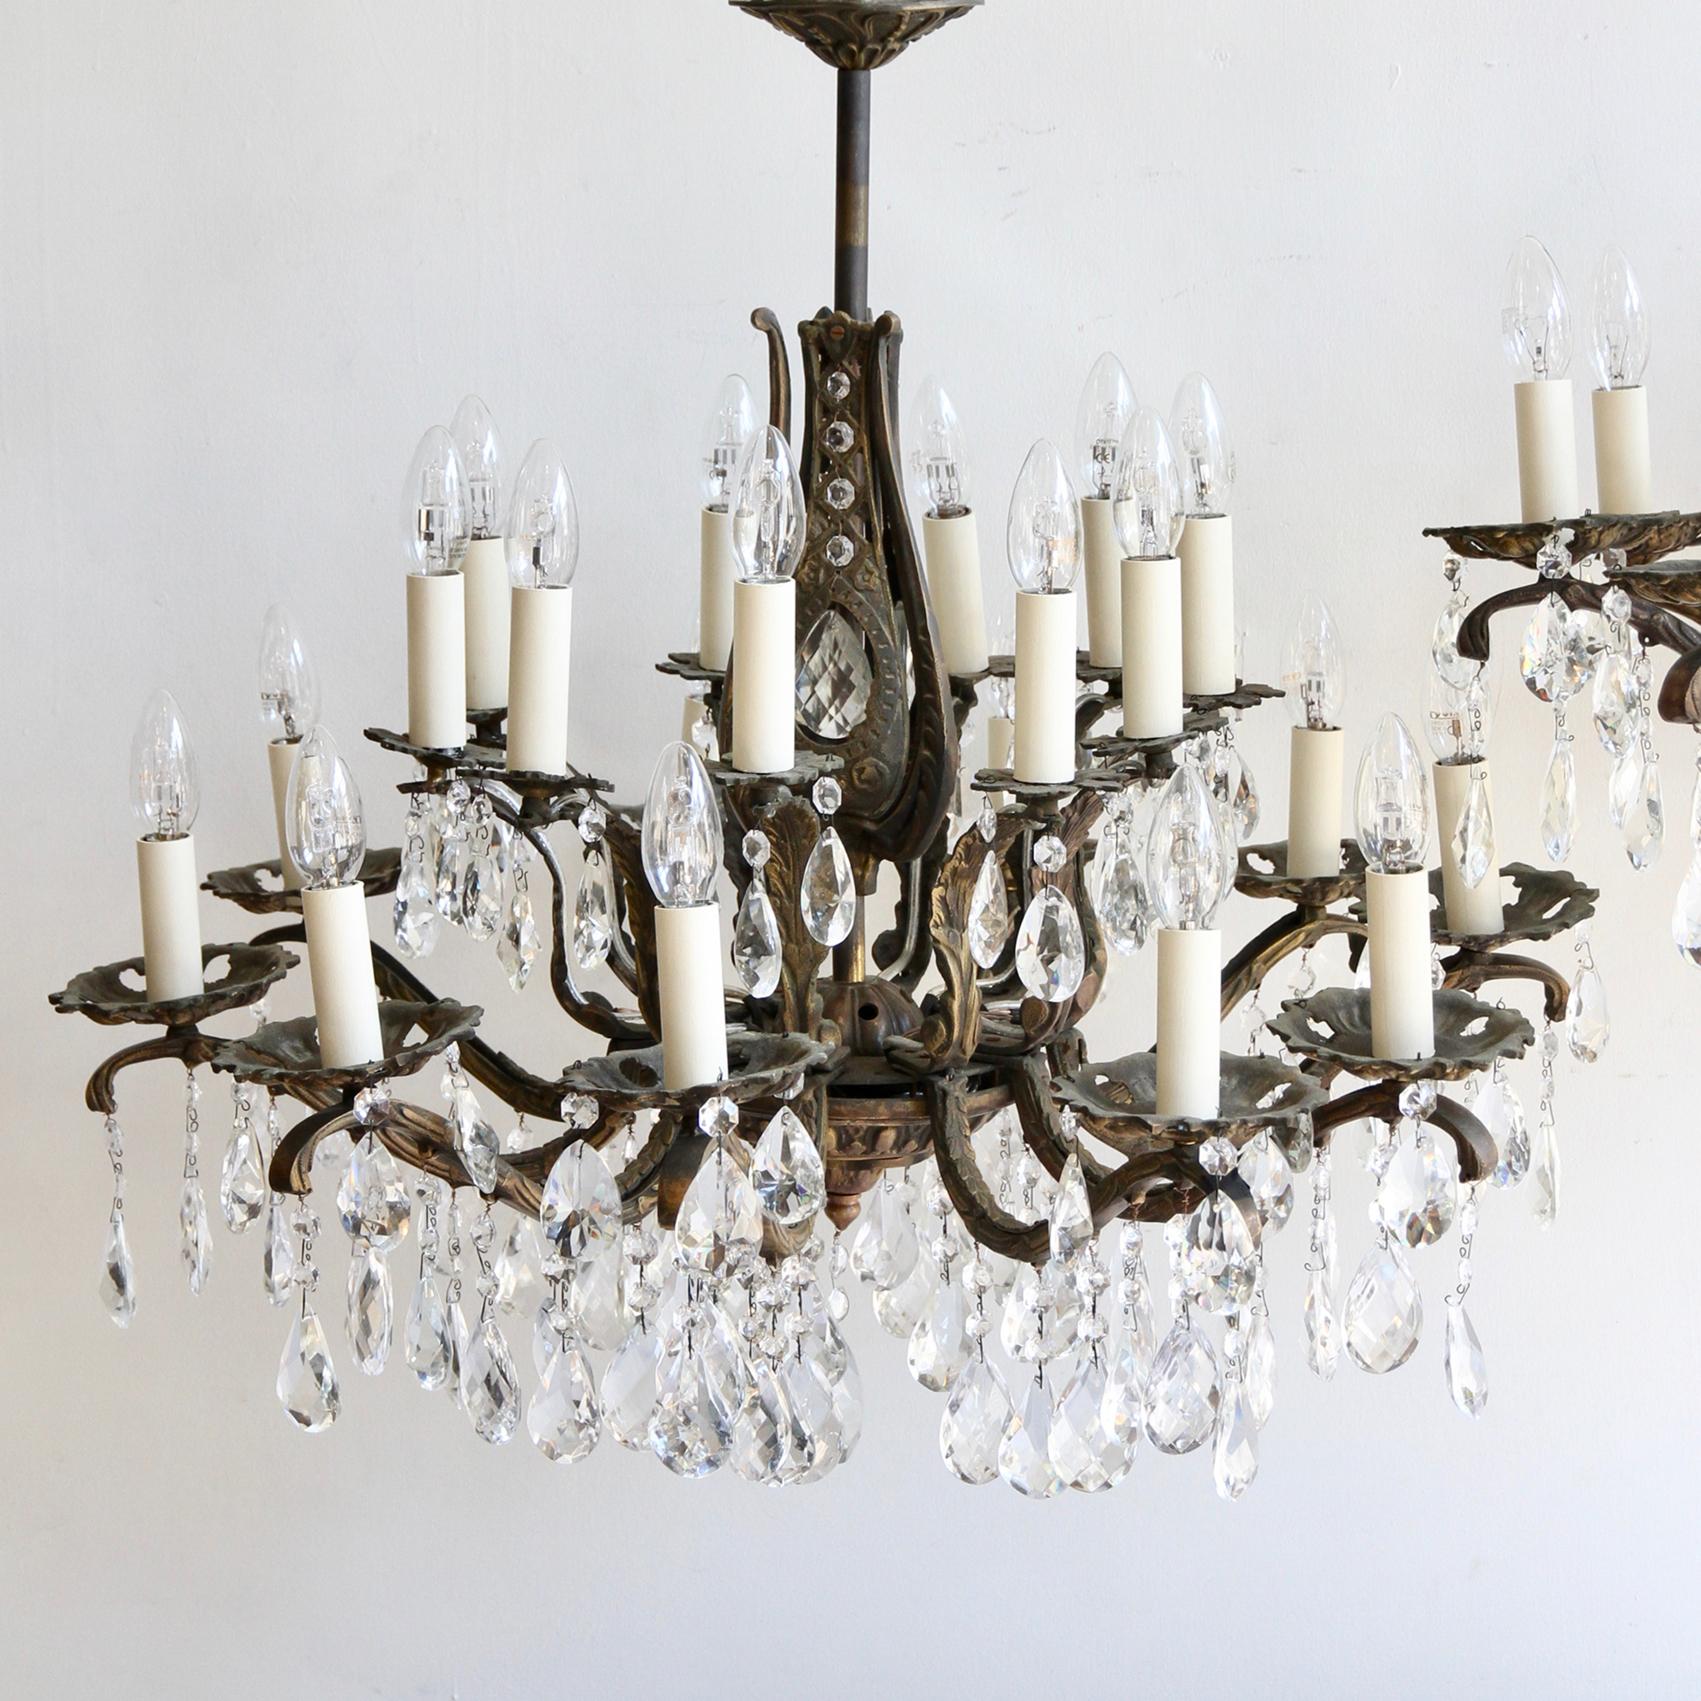 This pair of heavy cast ornate brass chandeliers originate from France, early 1900s and are dressed in a mix of fine cut glass harlequin drop and cut crystal pear drops. The chandelier frames are heavily oxidized each holding twenty lamps in total,